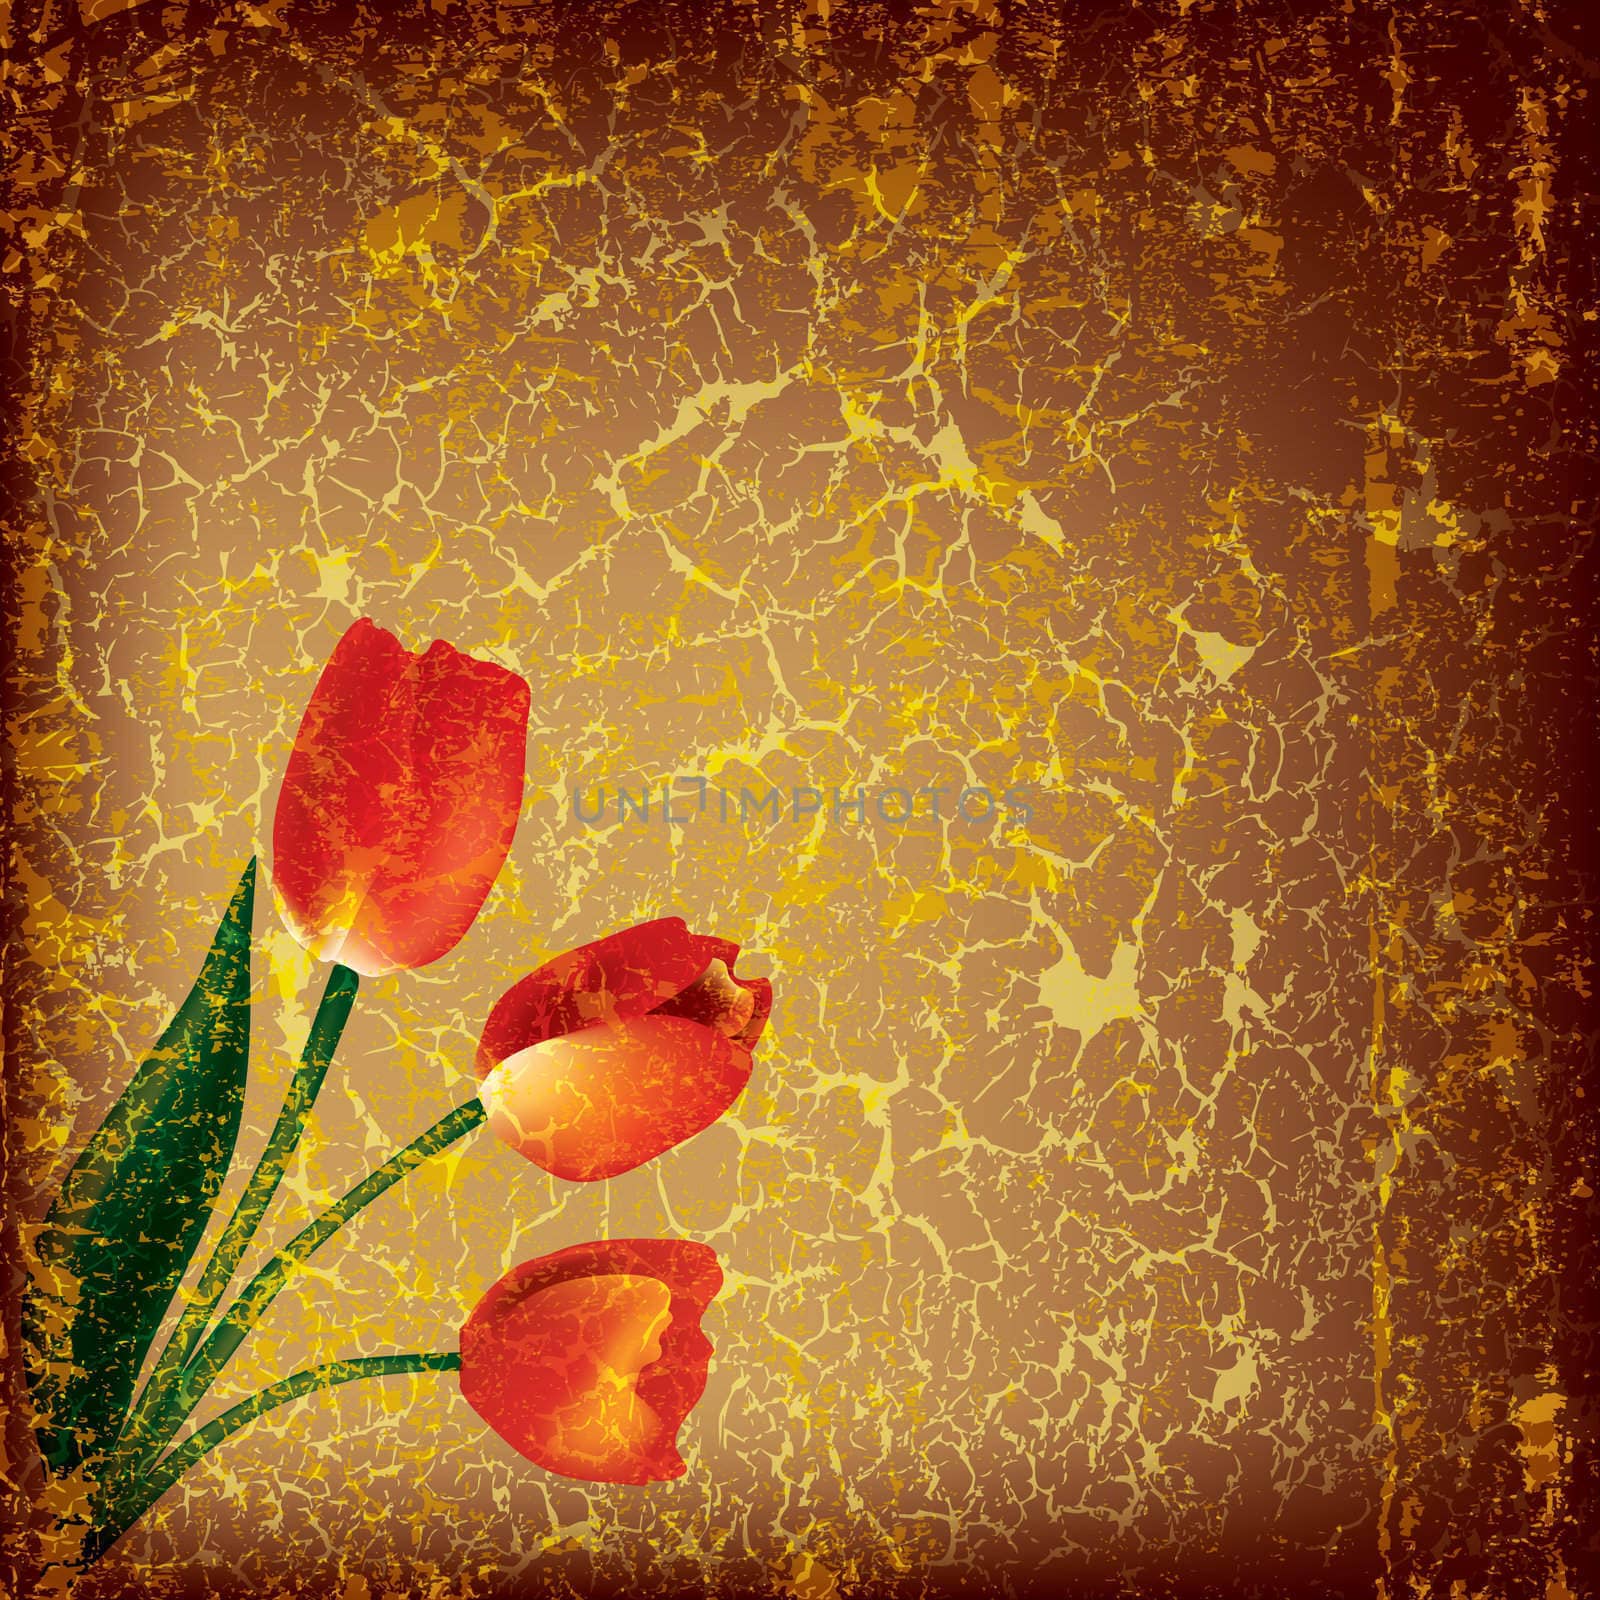 abstract grunge illustration with tulip on brown background